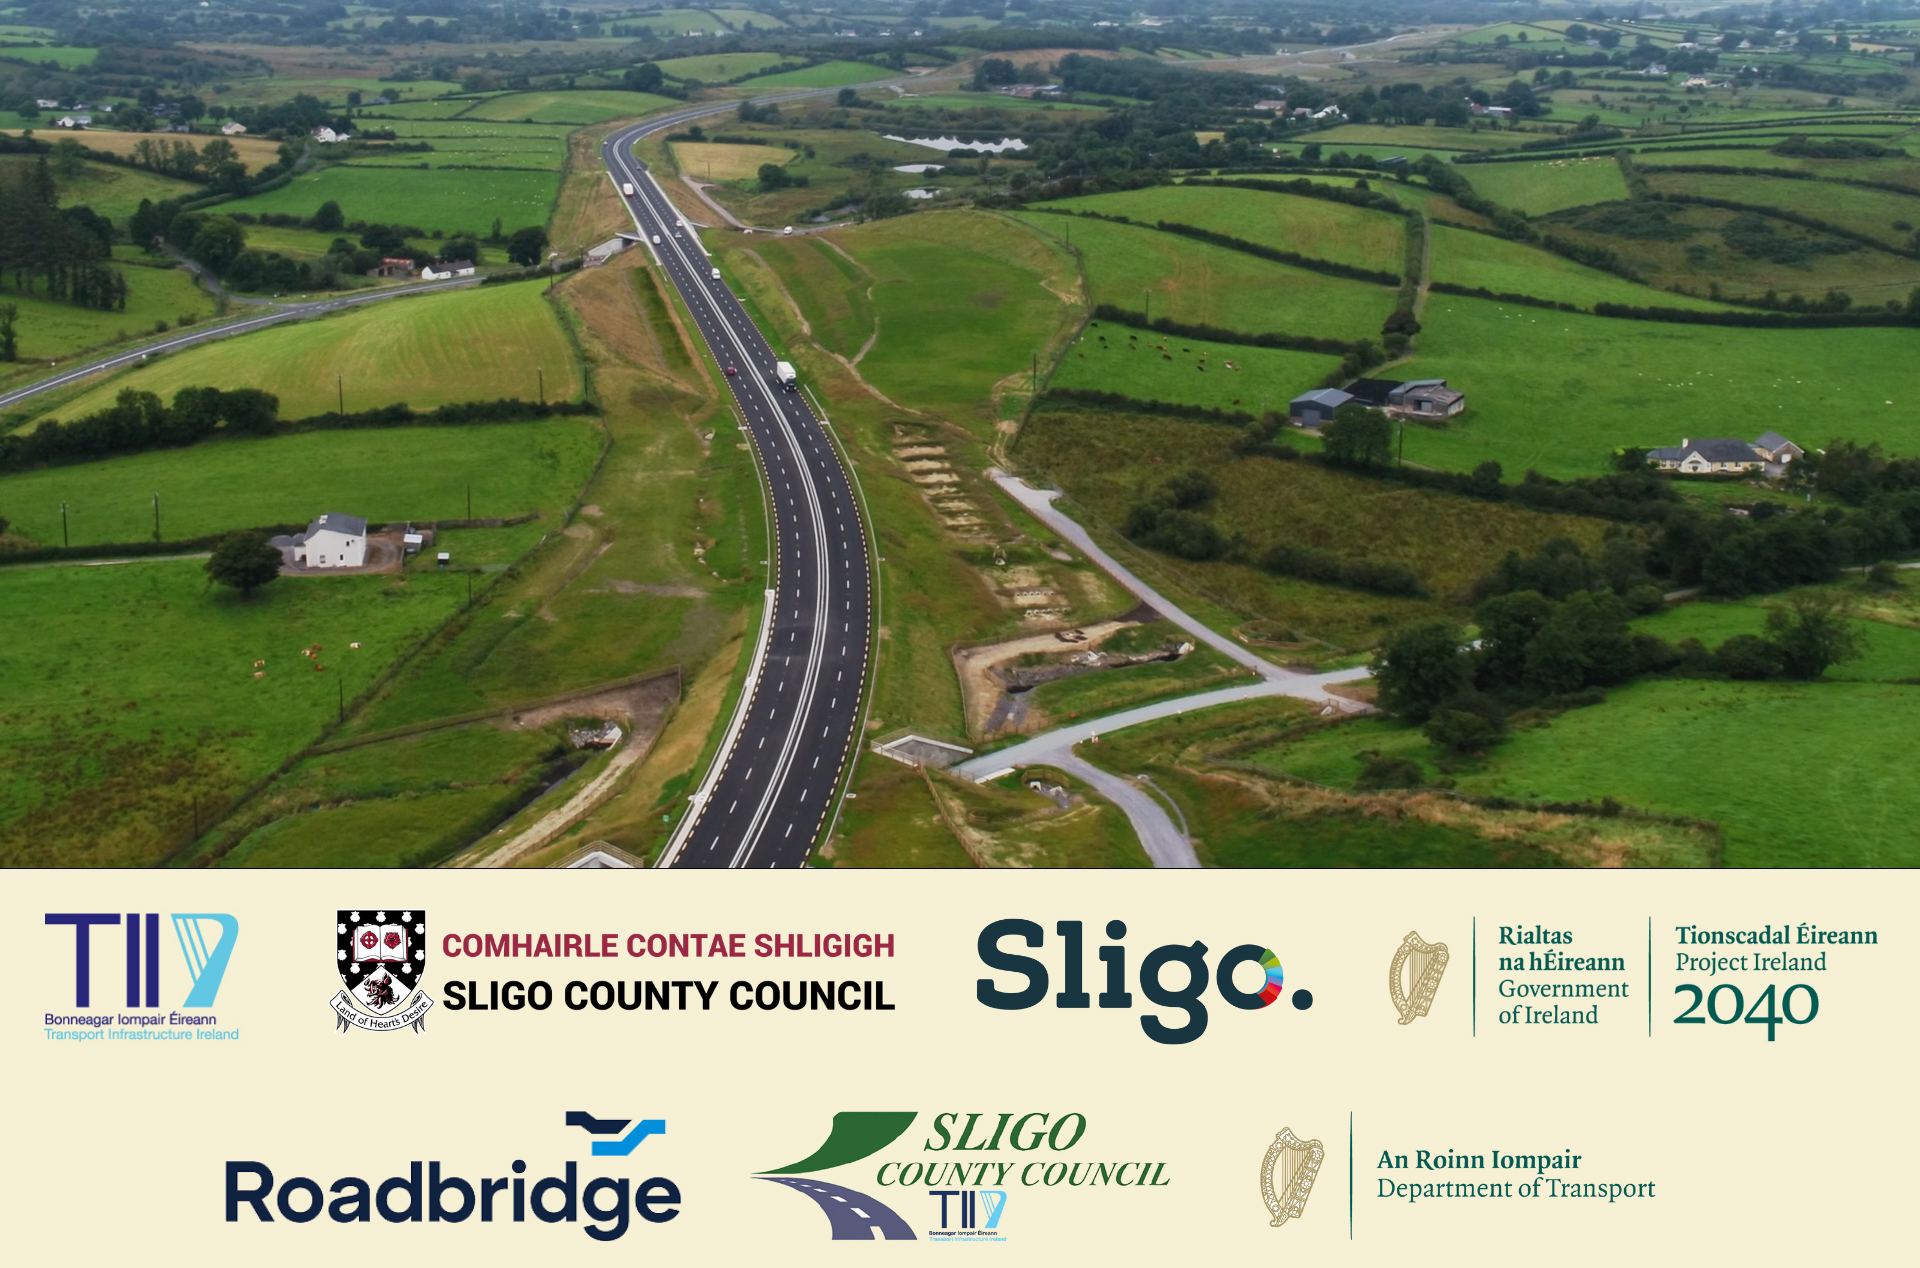 New N4 road significant milestone for Sligo and the North West